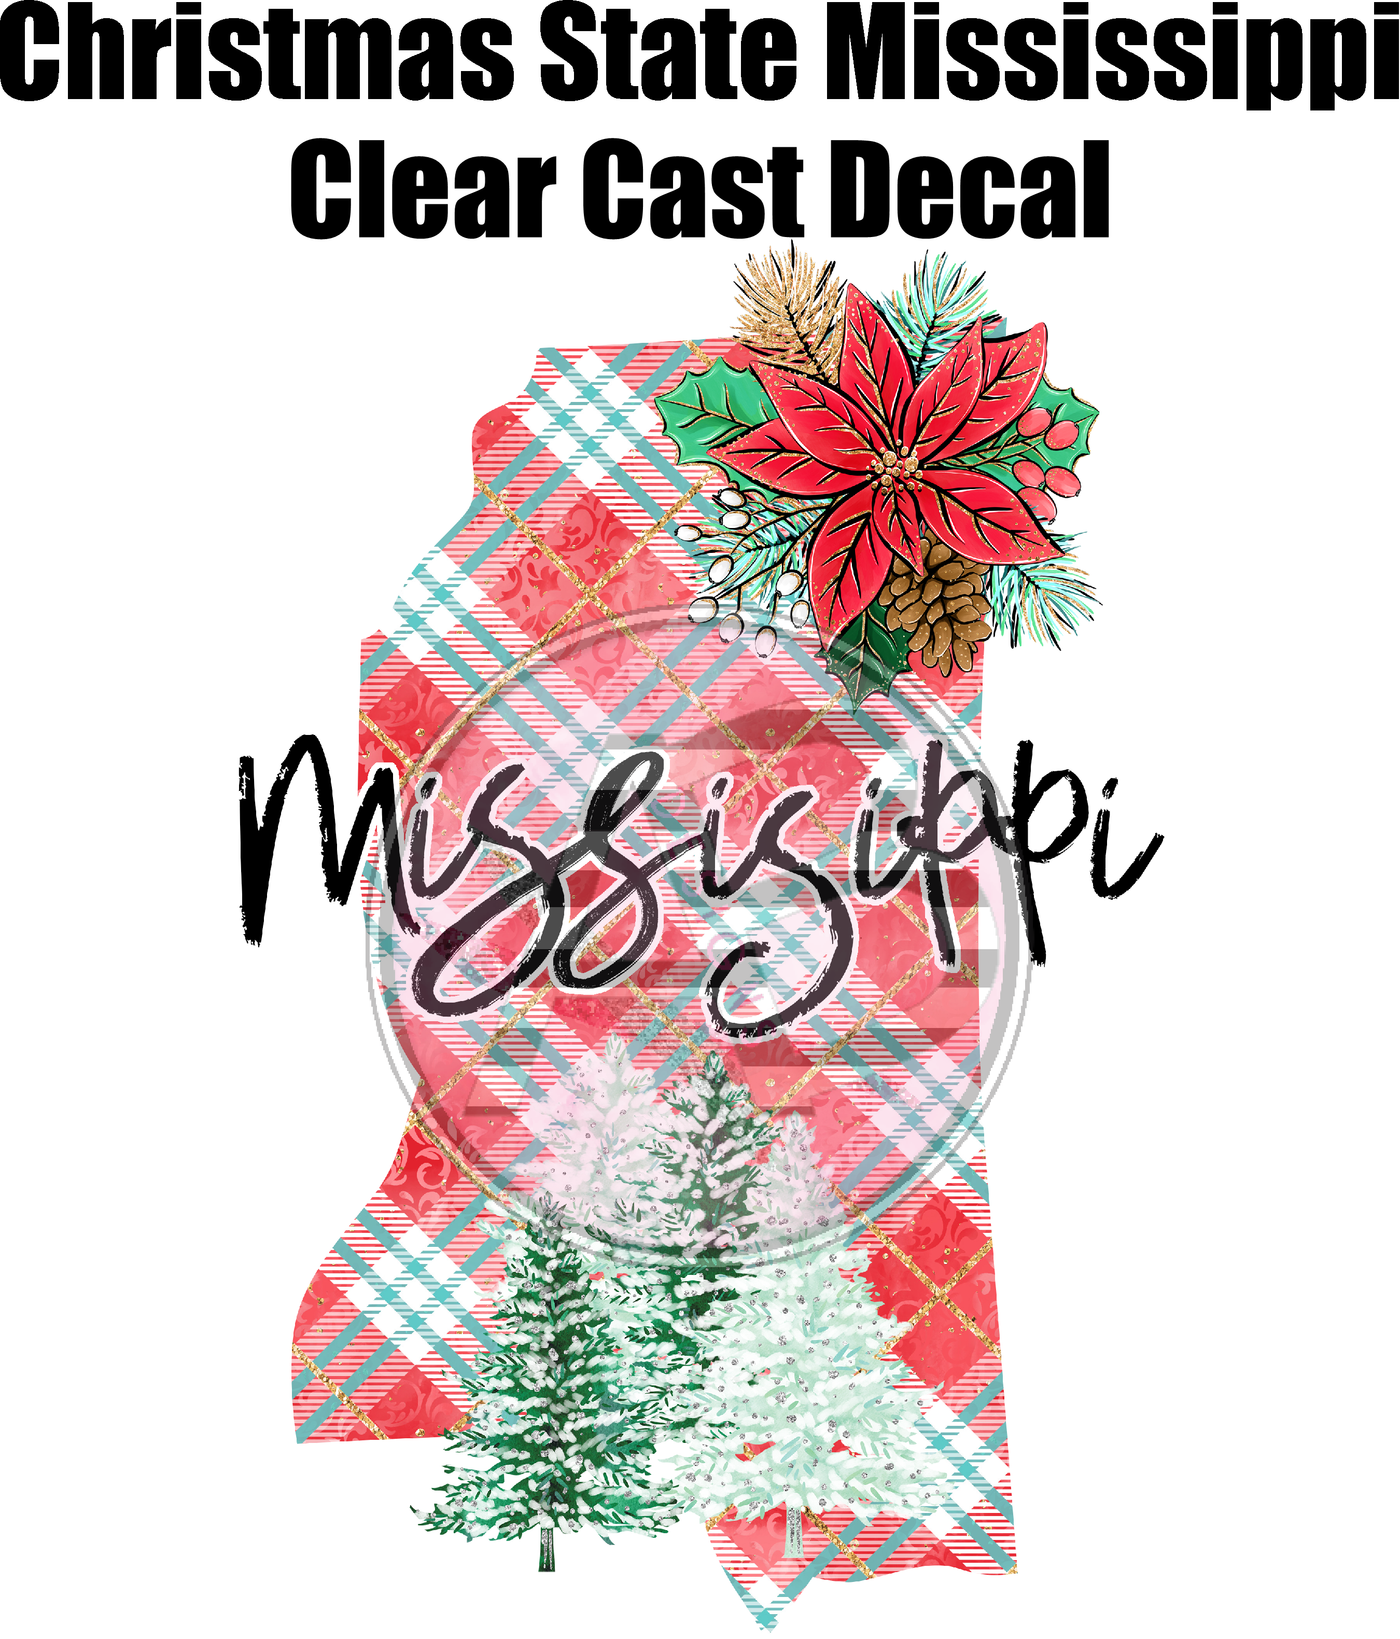 Christmas State Mississippi - Clear Cast Decal